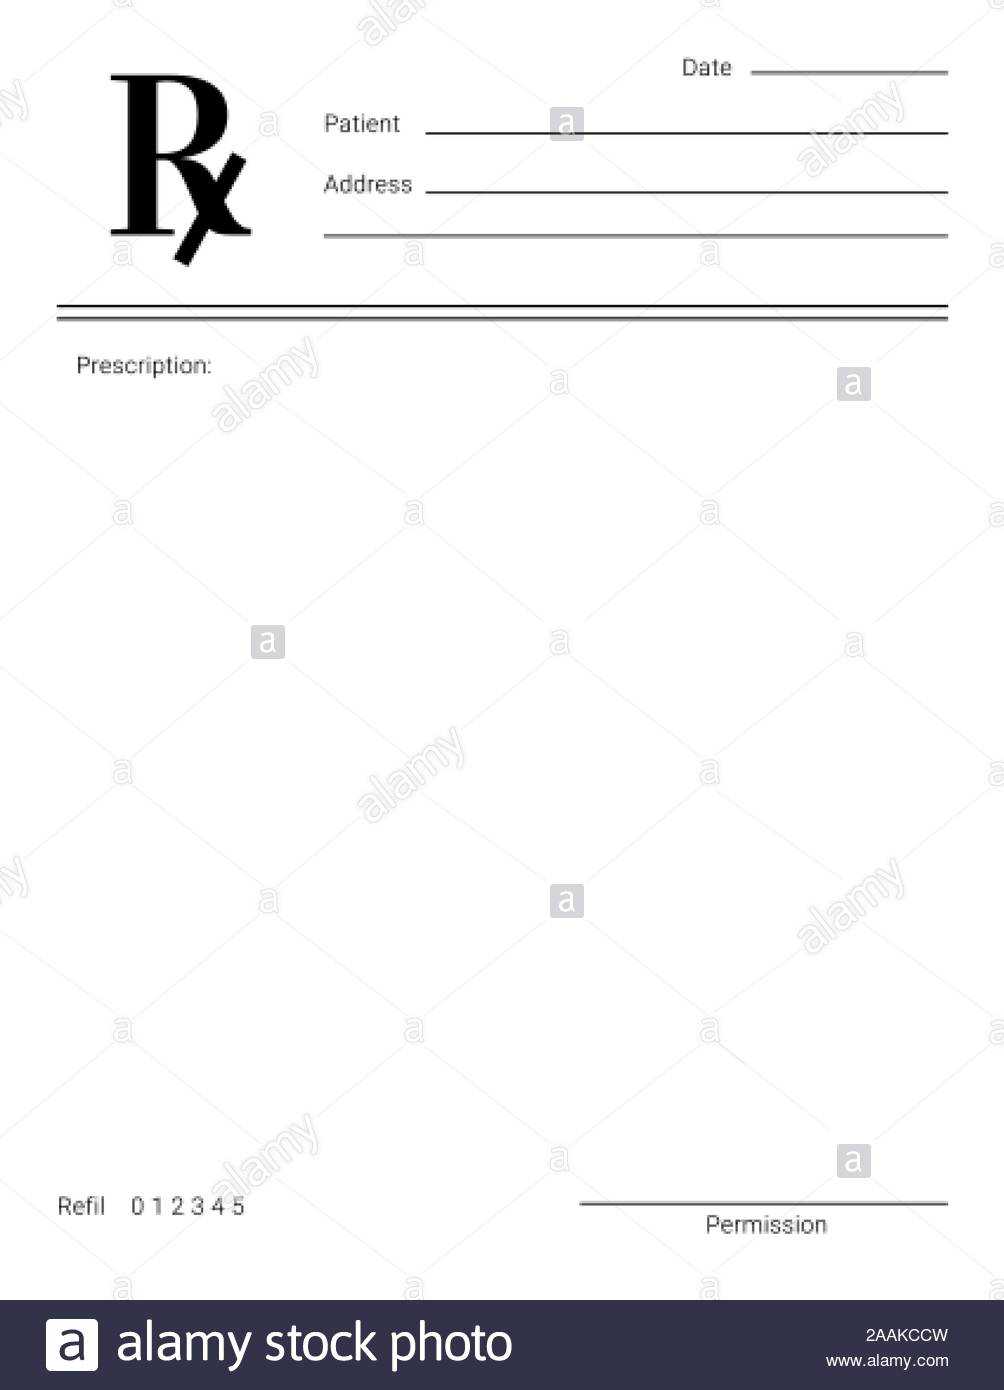 Blank Rx Form For Medical Treatment Prescription And Drugs Throughout Blank Prescription Form Template